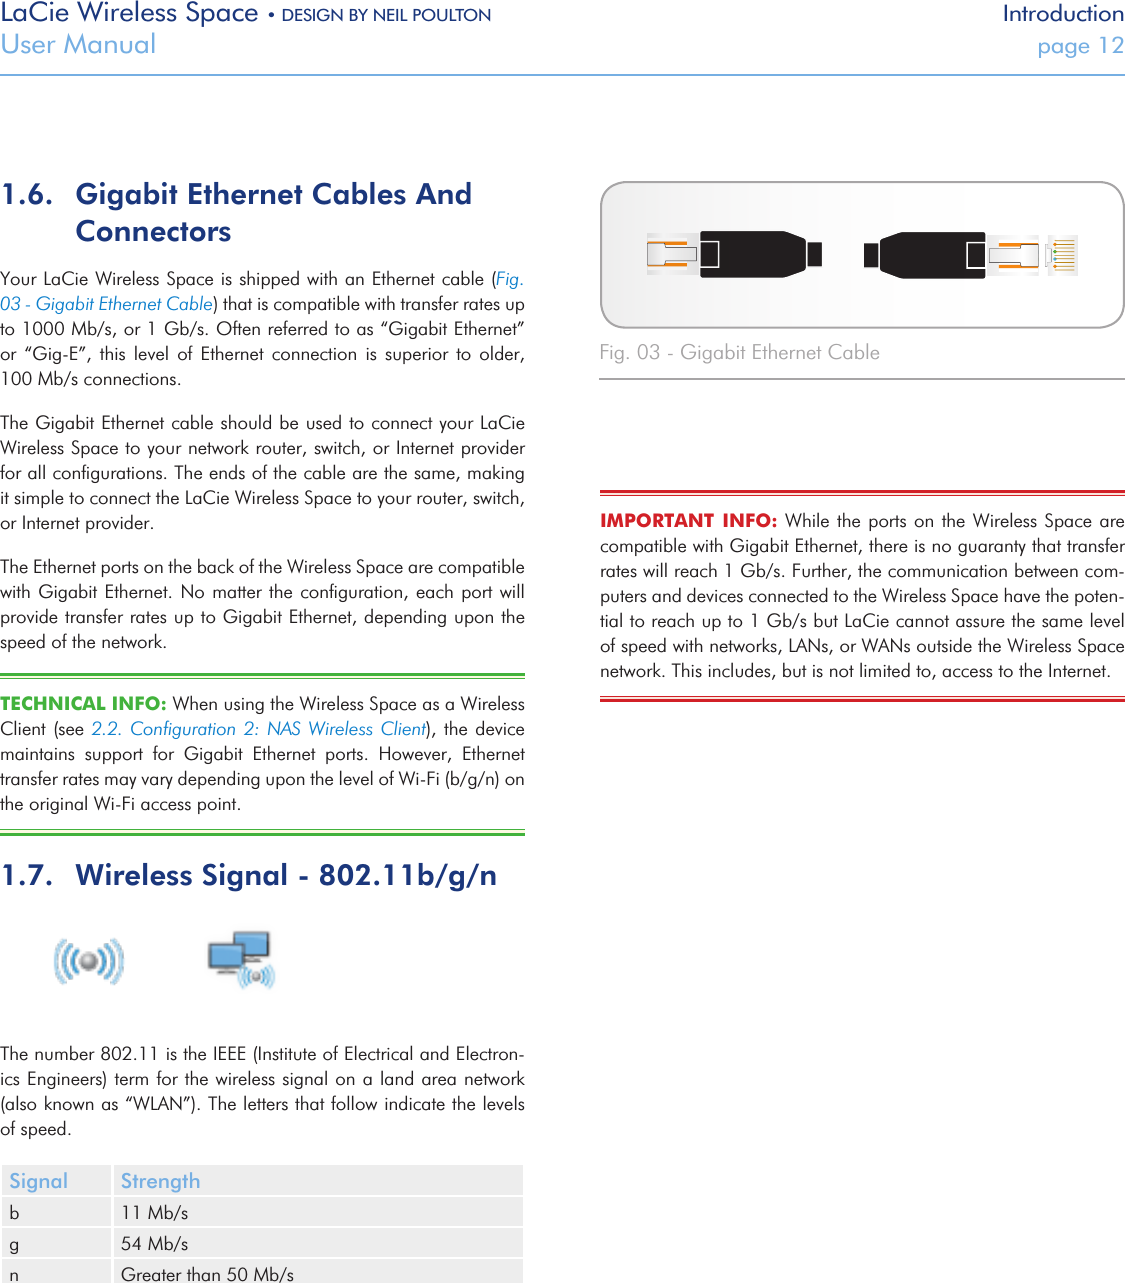 LaCie Wireless Space • DESIGN BY NEIL POULTON IntroductionUser Manual  page 121.6.  Gigabit Ethernet Cables And ConnectorsYour LaCie Wireless Space is shipped with an Ethernet cable (Fig. 03 - Gigabit Ethernet Cable) that is compatible with transfer rates up to 1000 Mb/s, or 1 Gb/s. Often referred to as “Gigabit Ethernet” or  “Gig-E”,  this  level  of  Ethernet  connection  is  superior  to  older,        100 Mb/s connections. The Gigabit Ethernet cable should be used to connect your LaCie Wireless Space to your network router, switch, or Internet provider for all conﬁgurations. The ends of the cable are the same, making it simple to connect the LaCie Wireless Space to your router, switch, or Internet provider.The Ethernet ports on the back of the Wireless Space are compatible with Gigabit Ethernet. No  matter the  conﬁguration, each  port will provide transfer rates up to Gigabit Ethernet, depending upon the speed of the network. TECHNICAL INFO: When using the Wireless Space as a Wireless  Client (see 2.2.  Conﬁguration 2:  NAS Wireless Client), the  device maintains  support  for  Gigabit  Ethernet  ports.  However,  Ethernet transfer rates may vary depending upon the level of Wi-Fi (b/g/n) on the original Wi-Fi access point. 1.7.  Wireless Signal - 802.11b/g/nThe number 802.11 is the IEEE (Institute of Electrical and Electron-ics Engineers) term for the wireless signal on a land area network (also known as “WLAN”). The letters that follow indicate the levels of speed. Signal Strengthb 11 Mb/sg 54 Mb/sn Greater than 50 Mb/s Fig. 03 - Gigabit Ethernet CableIMPORTANT  INFO:  While  the ports on the  Wireless Space  are compatible with Gigabit Ethernet, there is no guaranty that transfer rates will reach 1 Gb/s. Further, the communication between com-puters and devices connected to the Wireless Space have the poten-tial to reach up to 1 Gb/s but LaCie cannot assure the same level of speed with networks, LANs, or WANs outside the Wireless Space network. This includes, but is not limited to, access to the Internet.